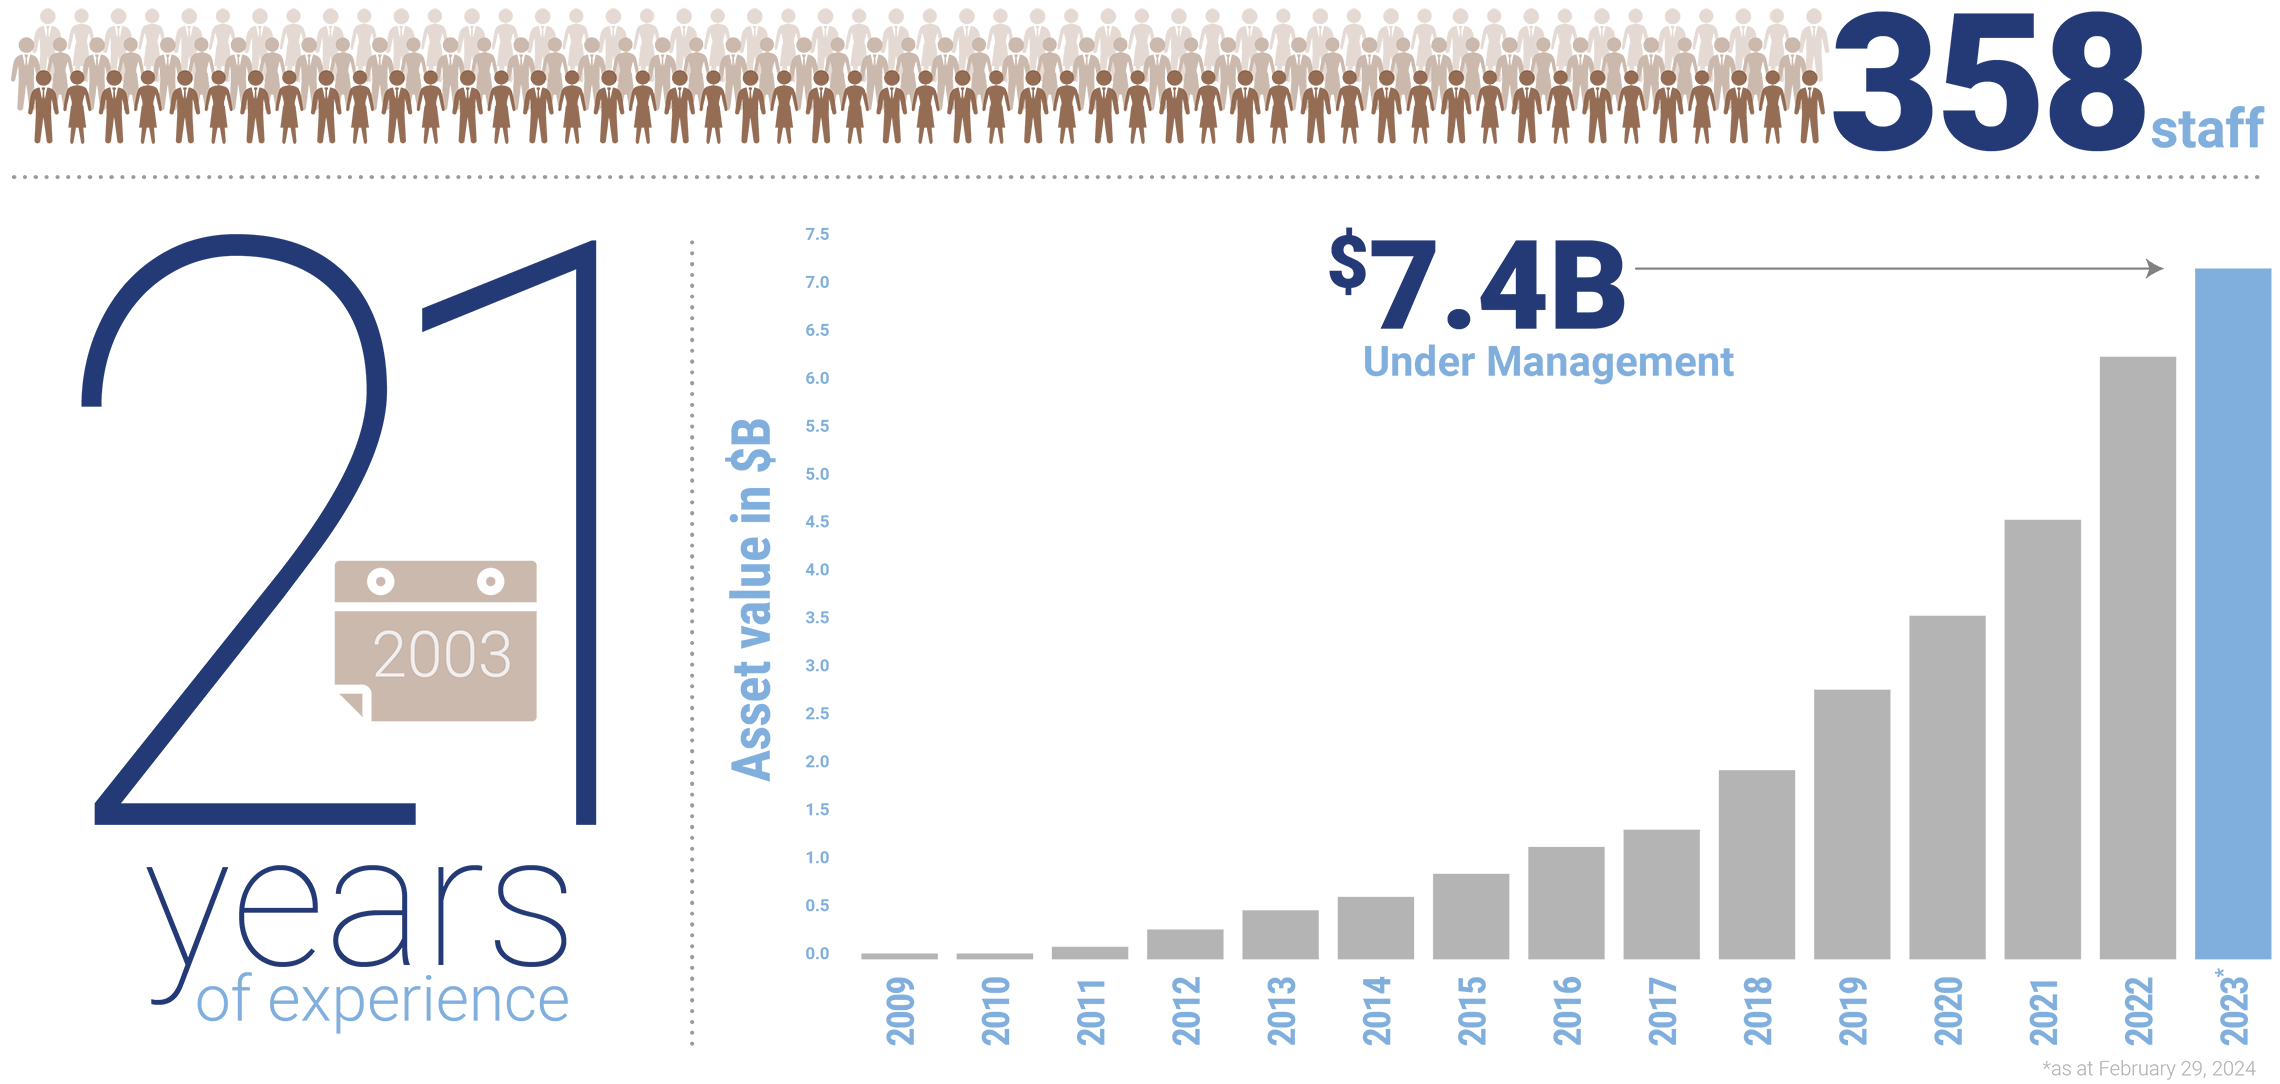 20 years of experience, 353 staff, over $6.7 billion under management as of February 28, 2023